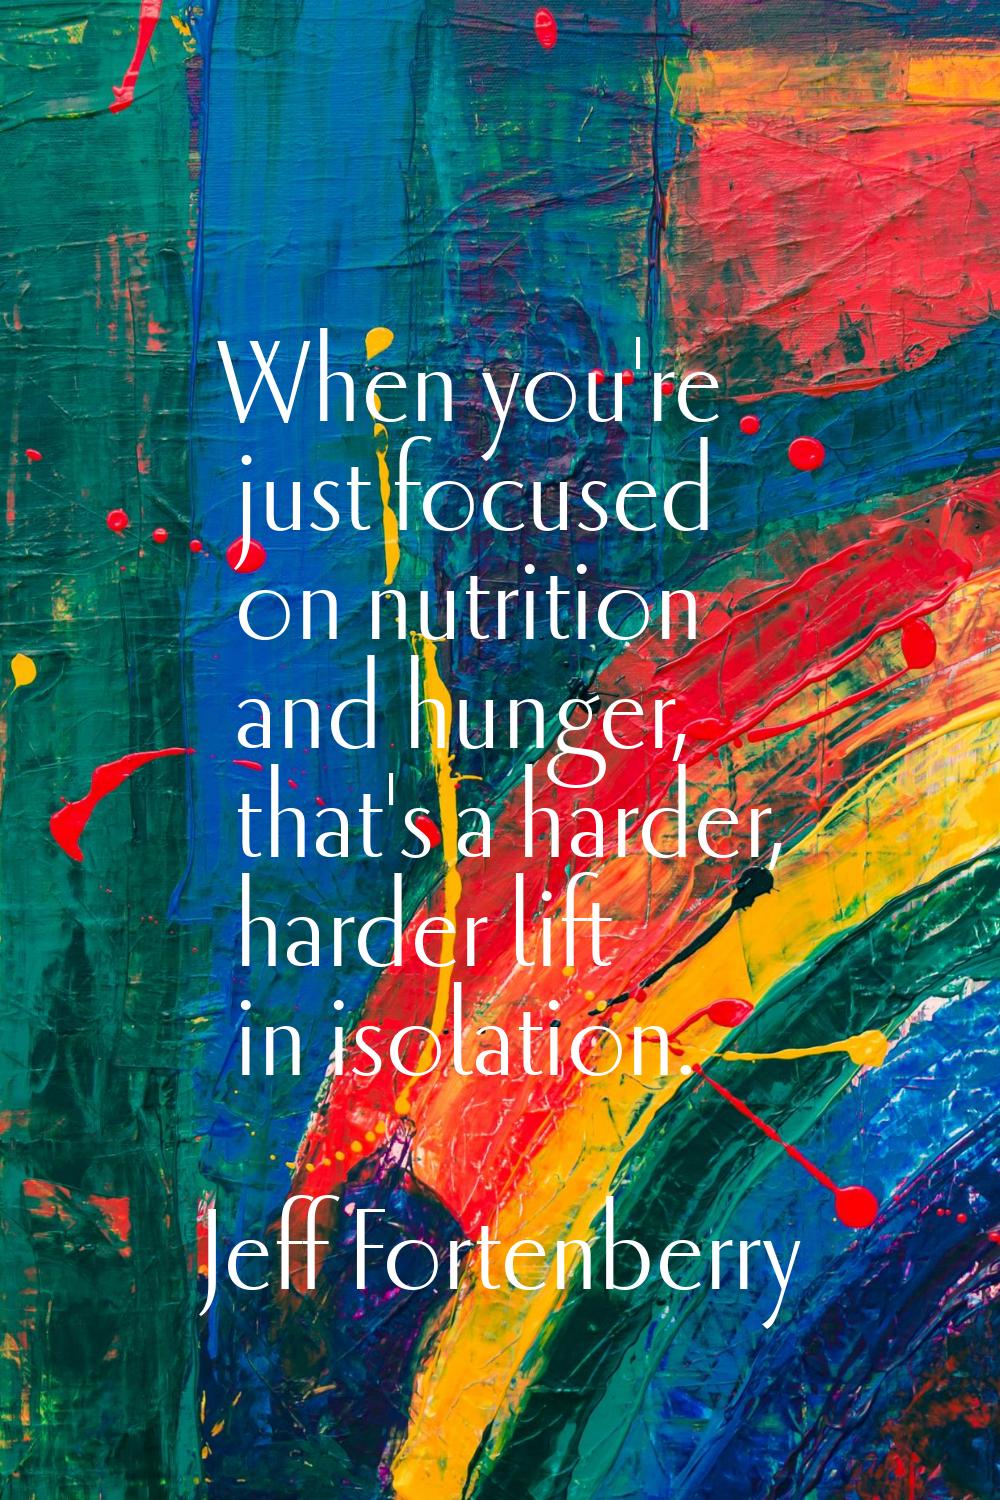 When you're just focused on nutrition and hunger, that's a harder, harder lift in isolation.